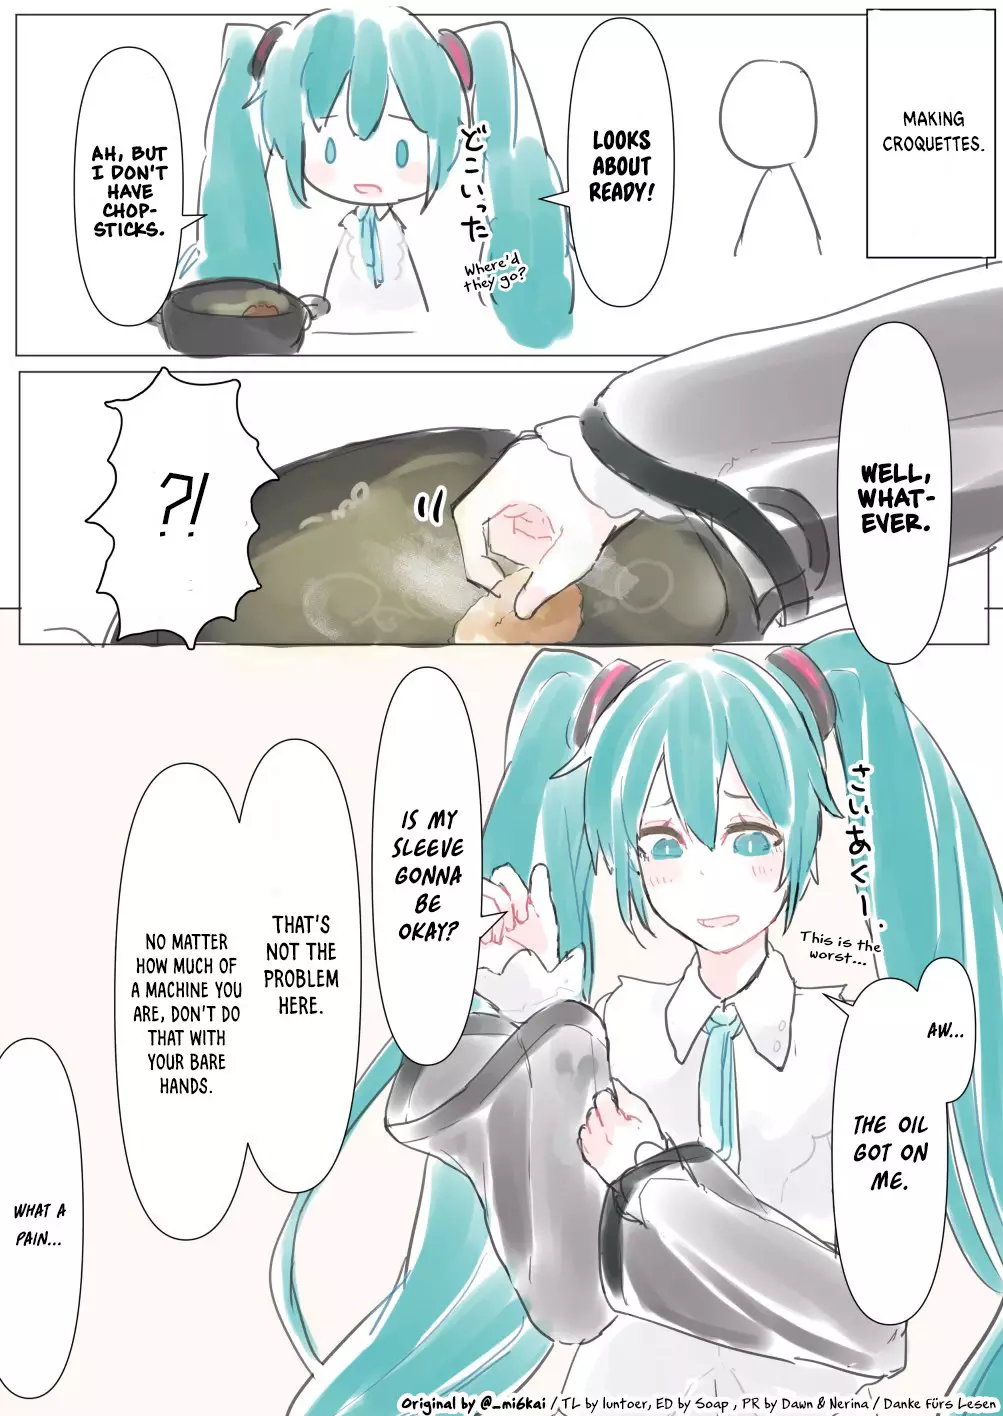 The Daily Life Of Master & Hatsune Miku - 20 page 1-33edc766